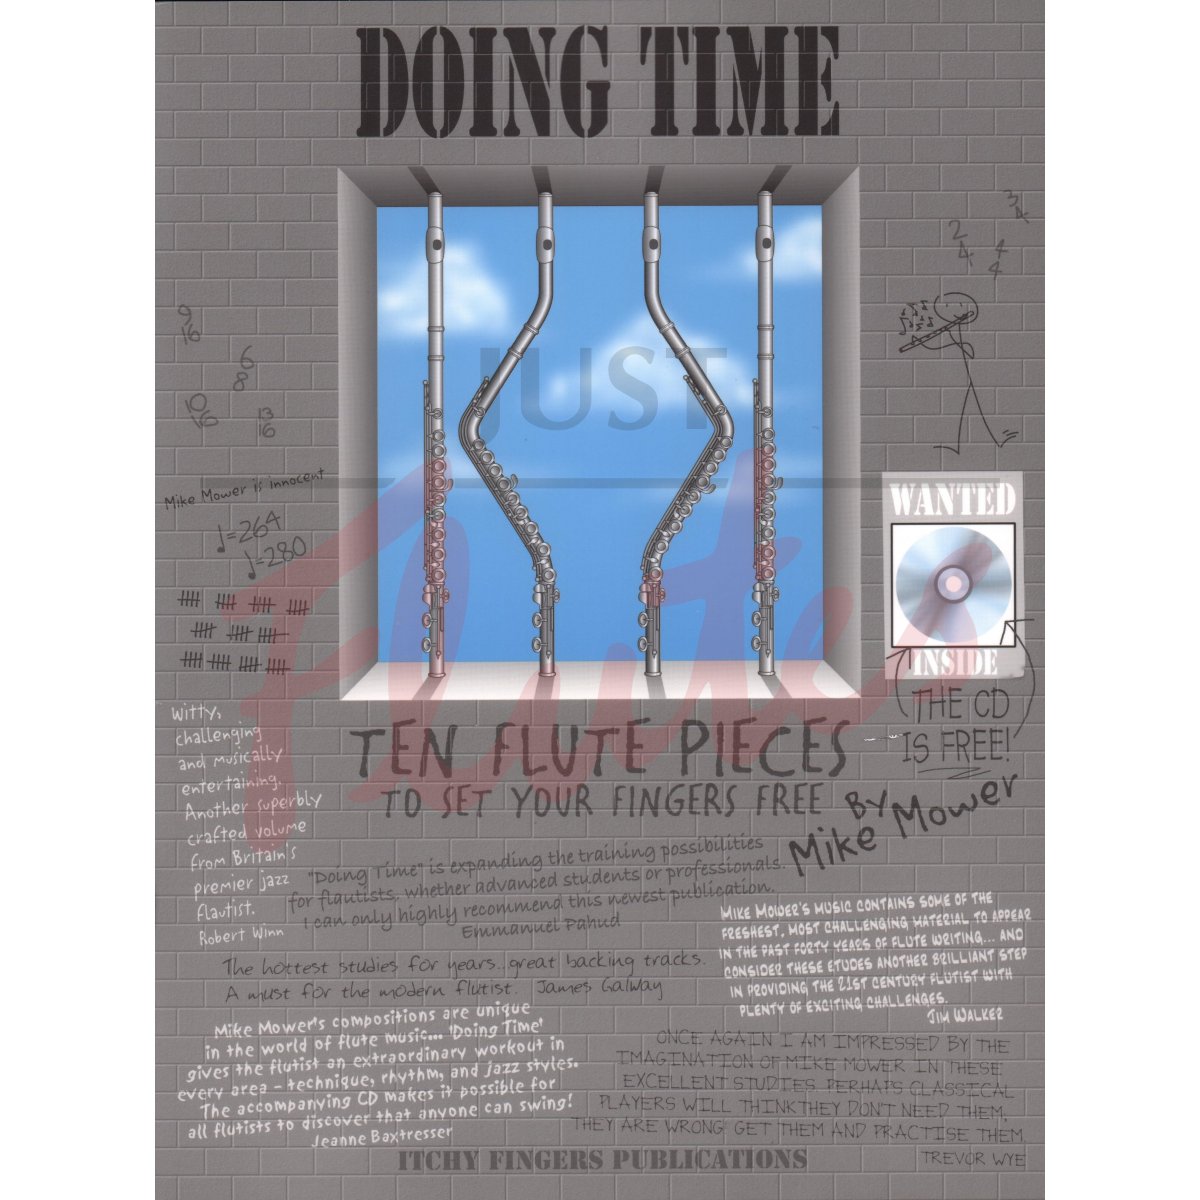 Doing Time for Flute